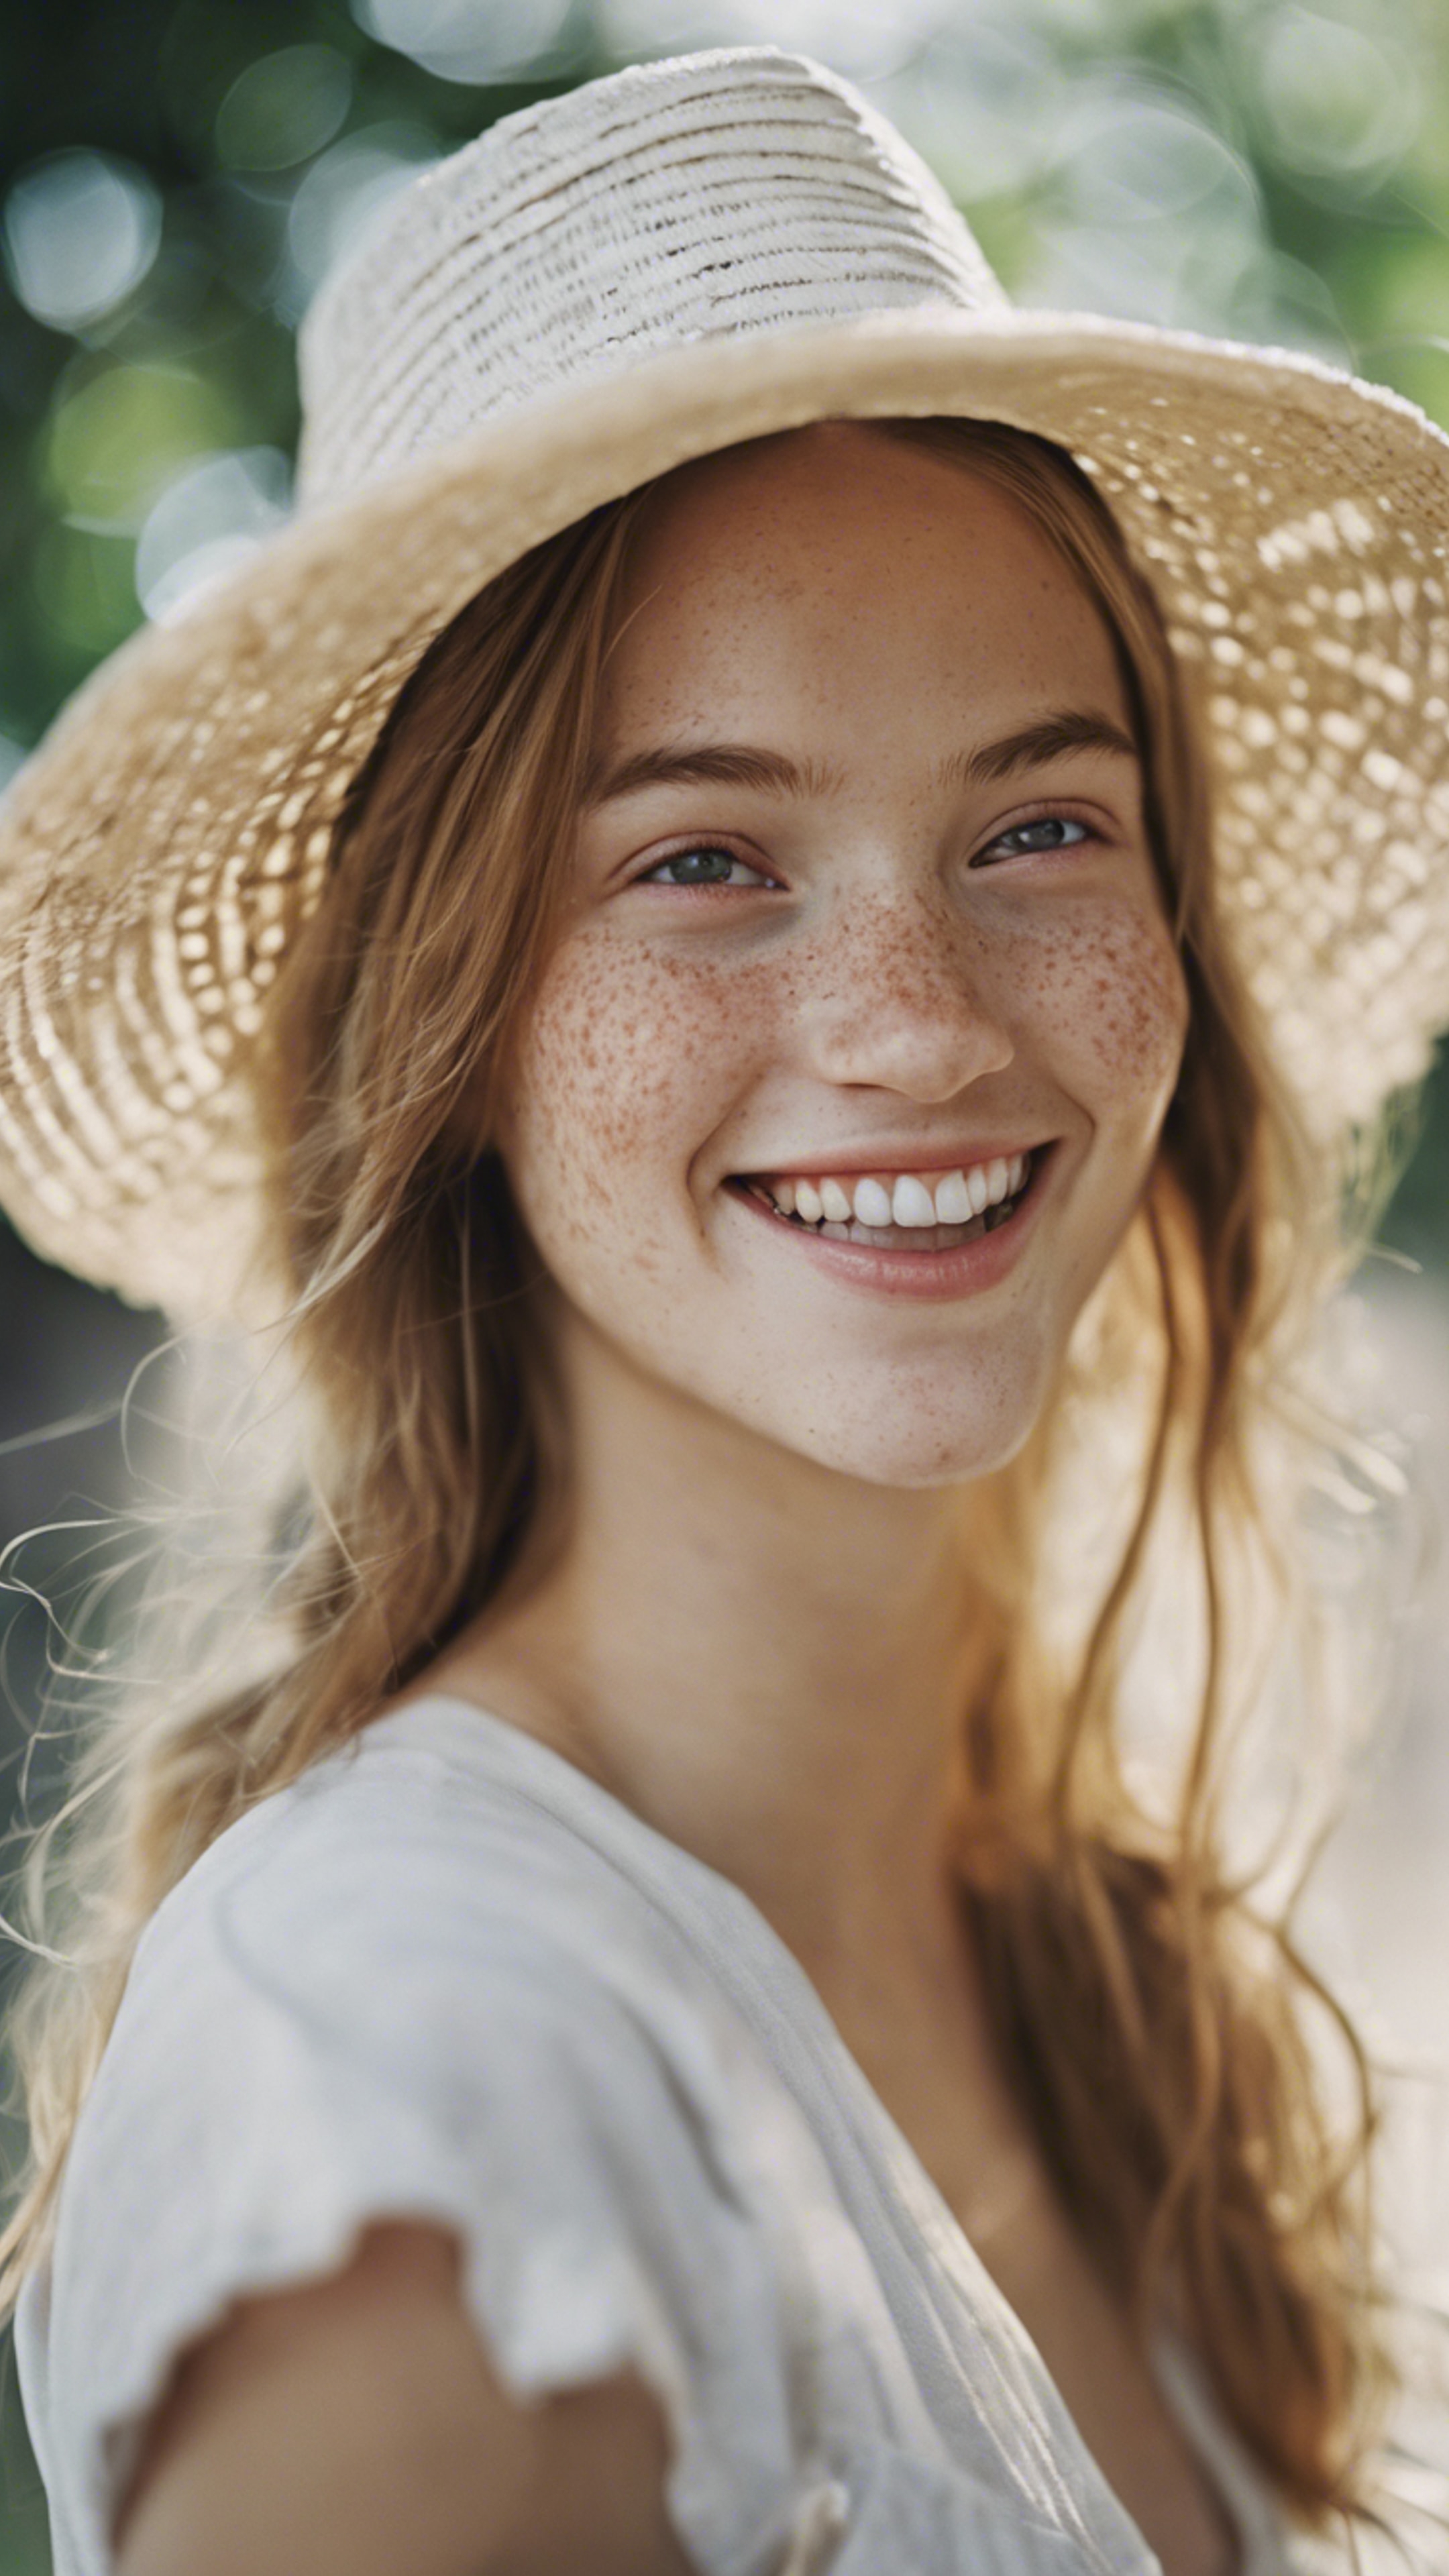 A portrait of a cute girl with freckles and a big smile, wearing a white straw hat.壁紙[344e43c9fe594ea98e55]